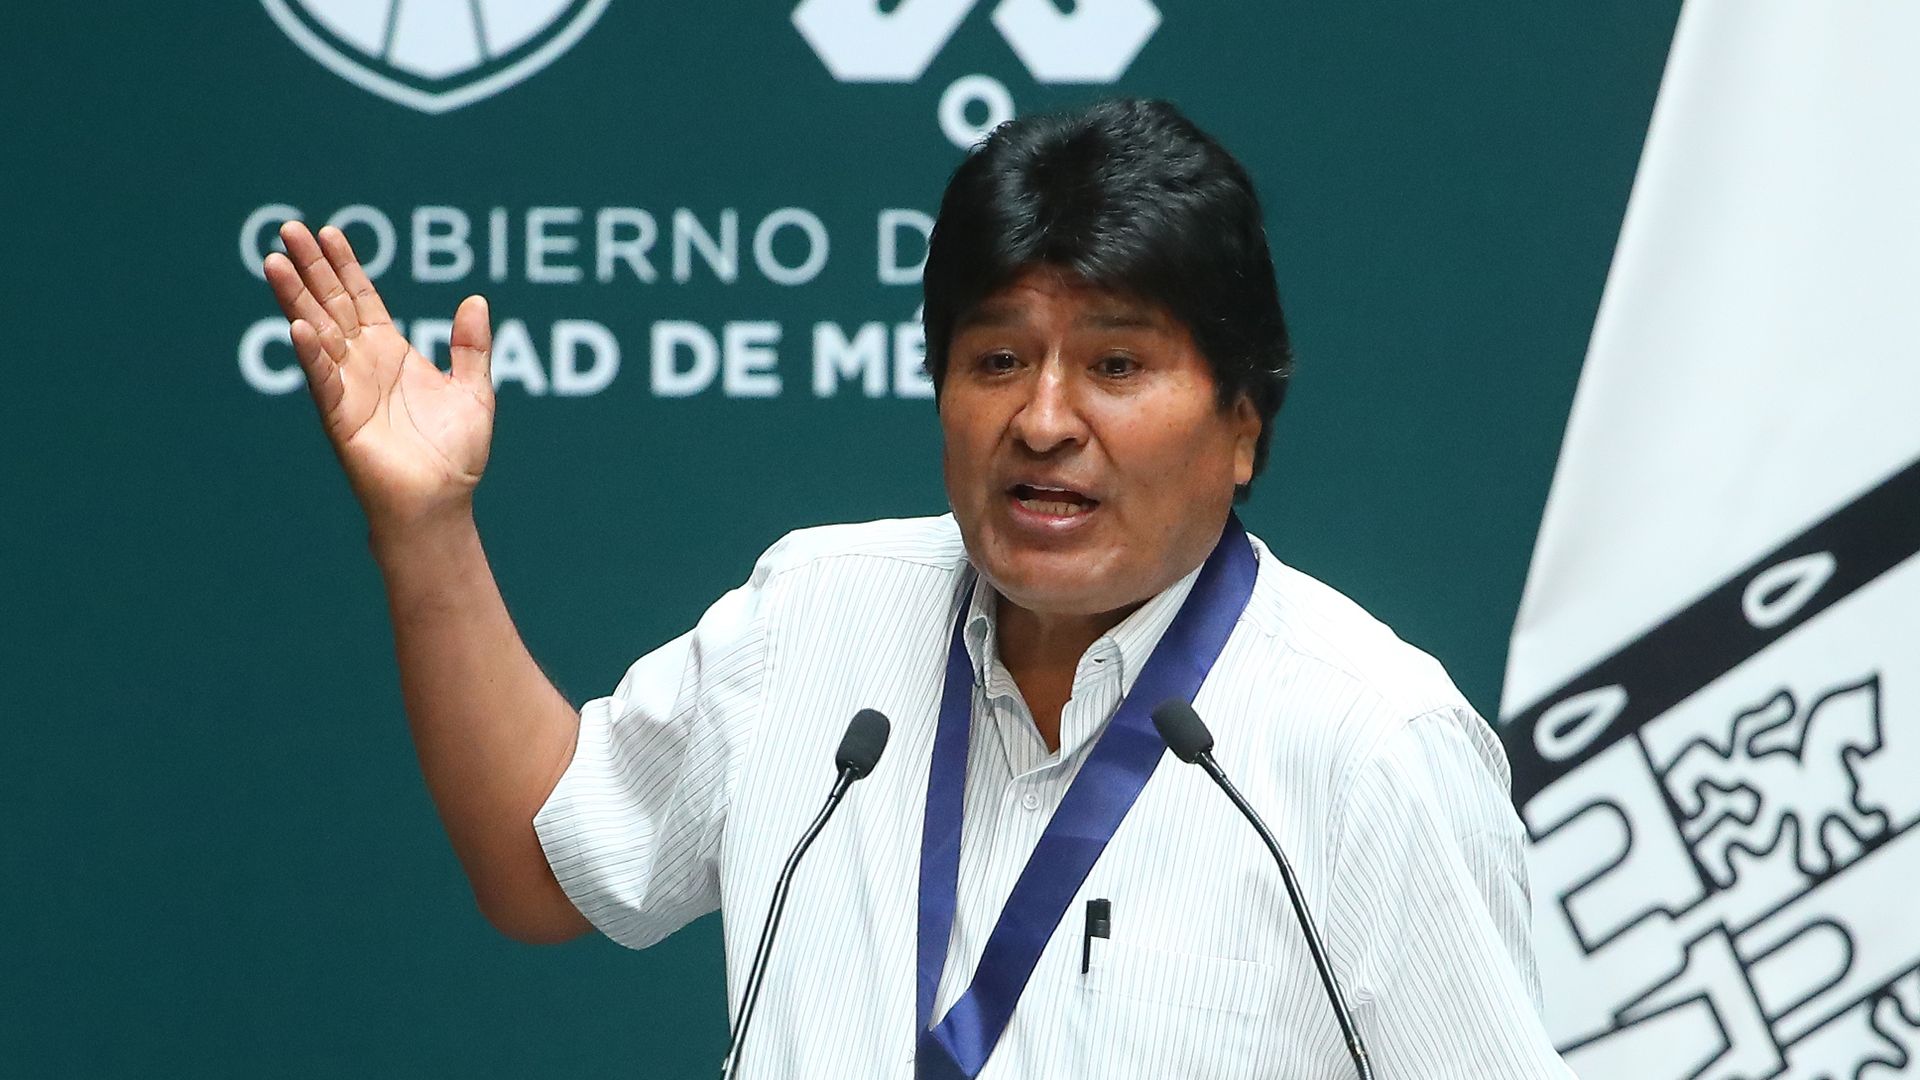 Former president of Bolivia Evo Morales speaks during an event honoring him at City Hall on November 13, 2019 in Mexico City, Mexico.